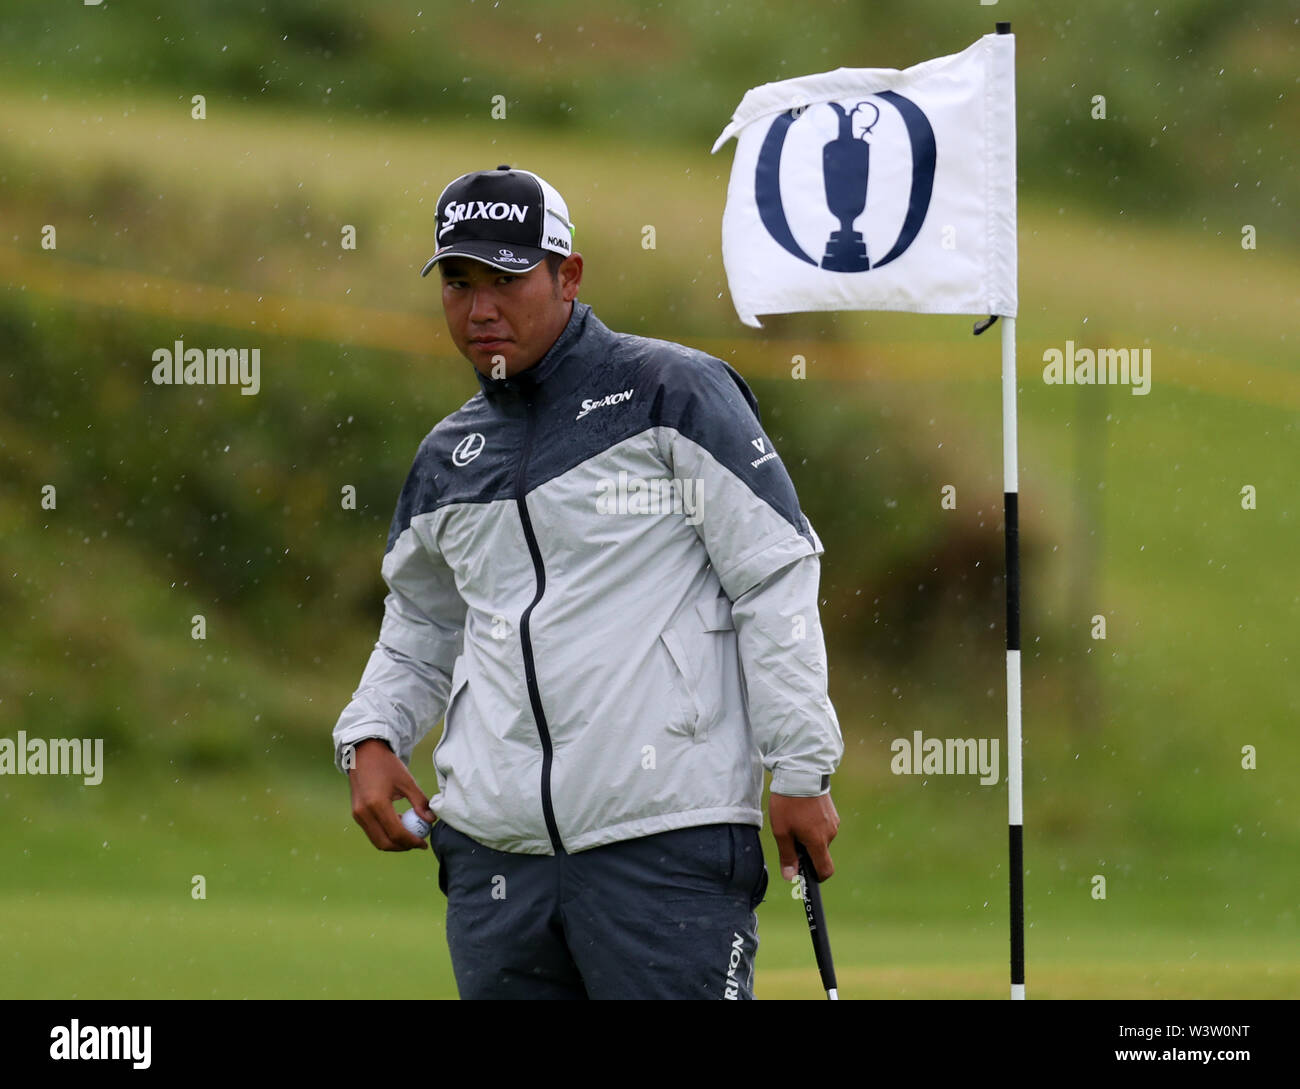 17th July, Portrush, Country Antrim, Northern Ireland; The 148th Open Golf Championship, Royal Portrush Golf Club, Practice day ; Hideki Matsuyama (JAP) watches his ball as he practices his putting on the 13th green Stock Photo